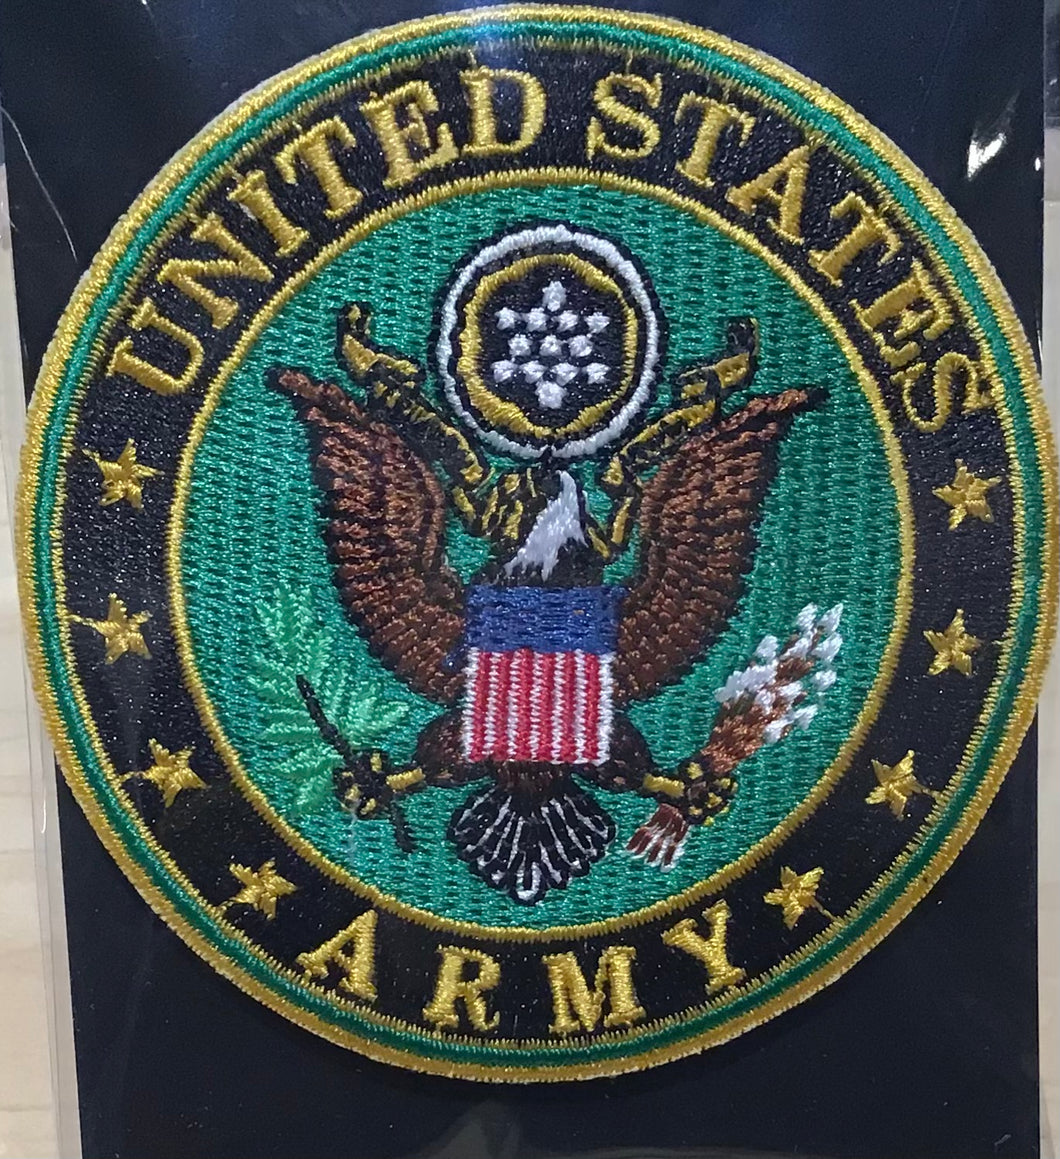 United States Army Crest Embroidered Patch Magnet